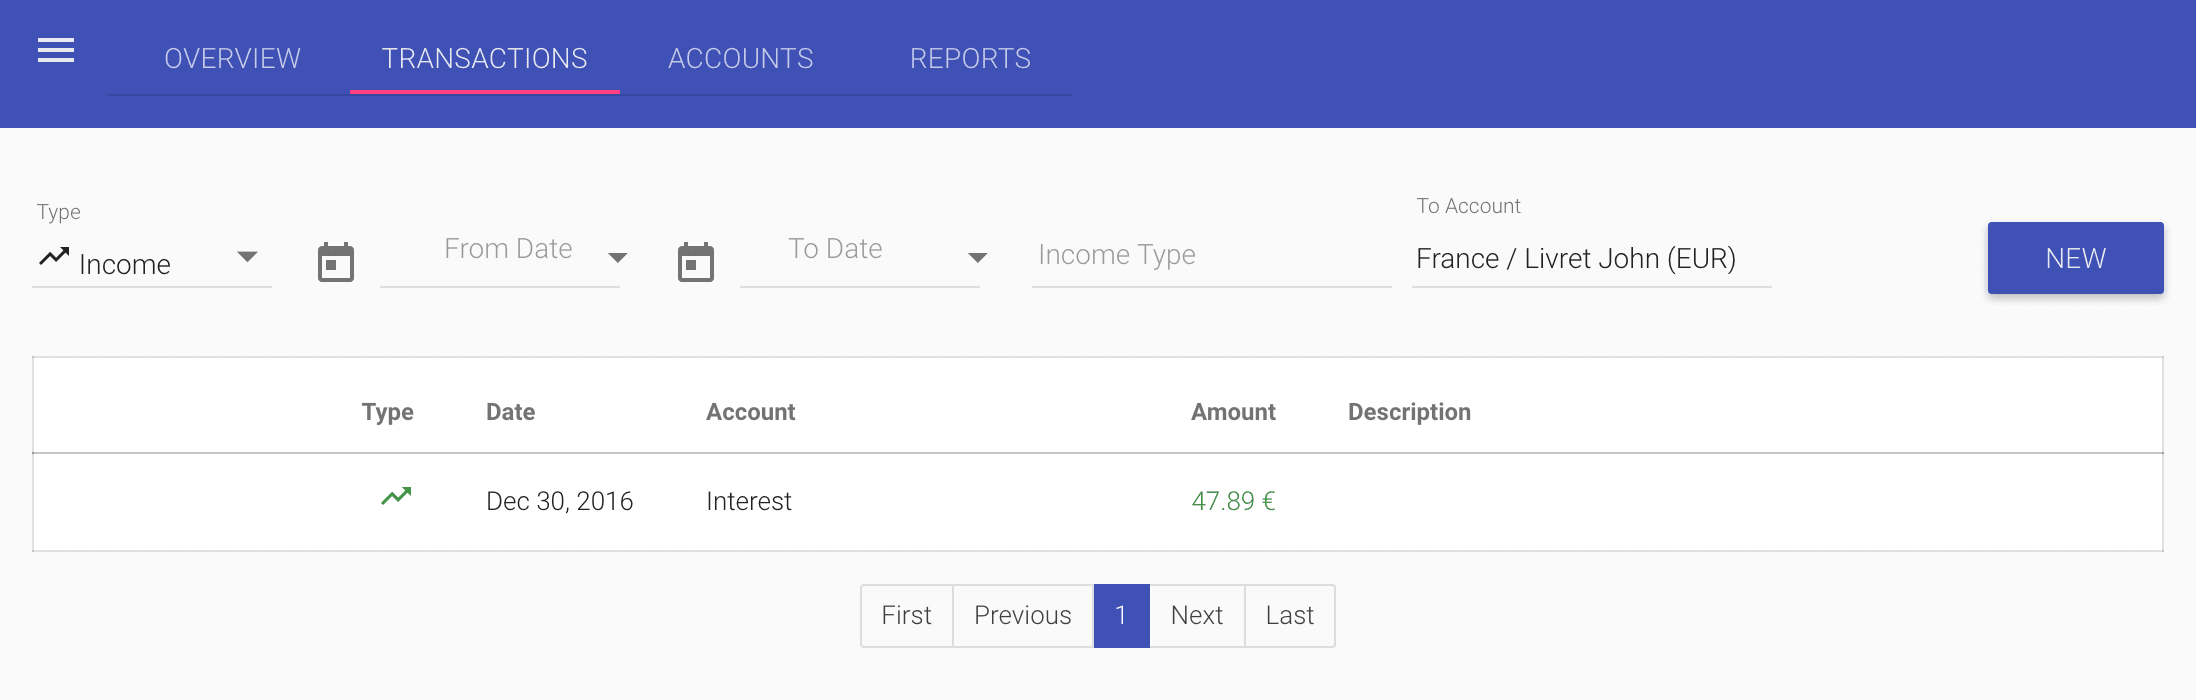 Income transactions for the selected Account